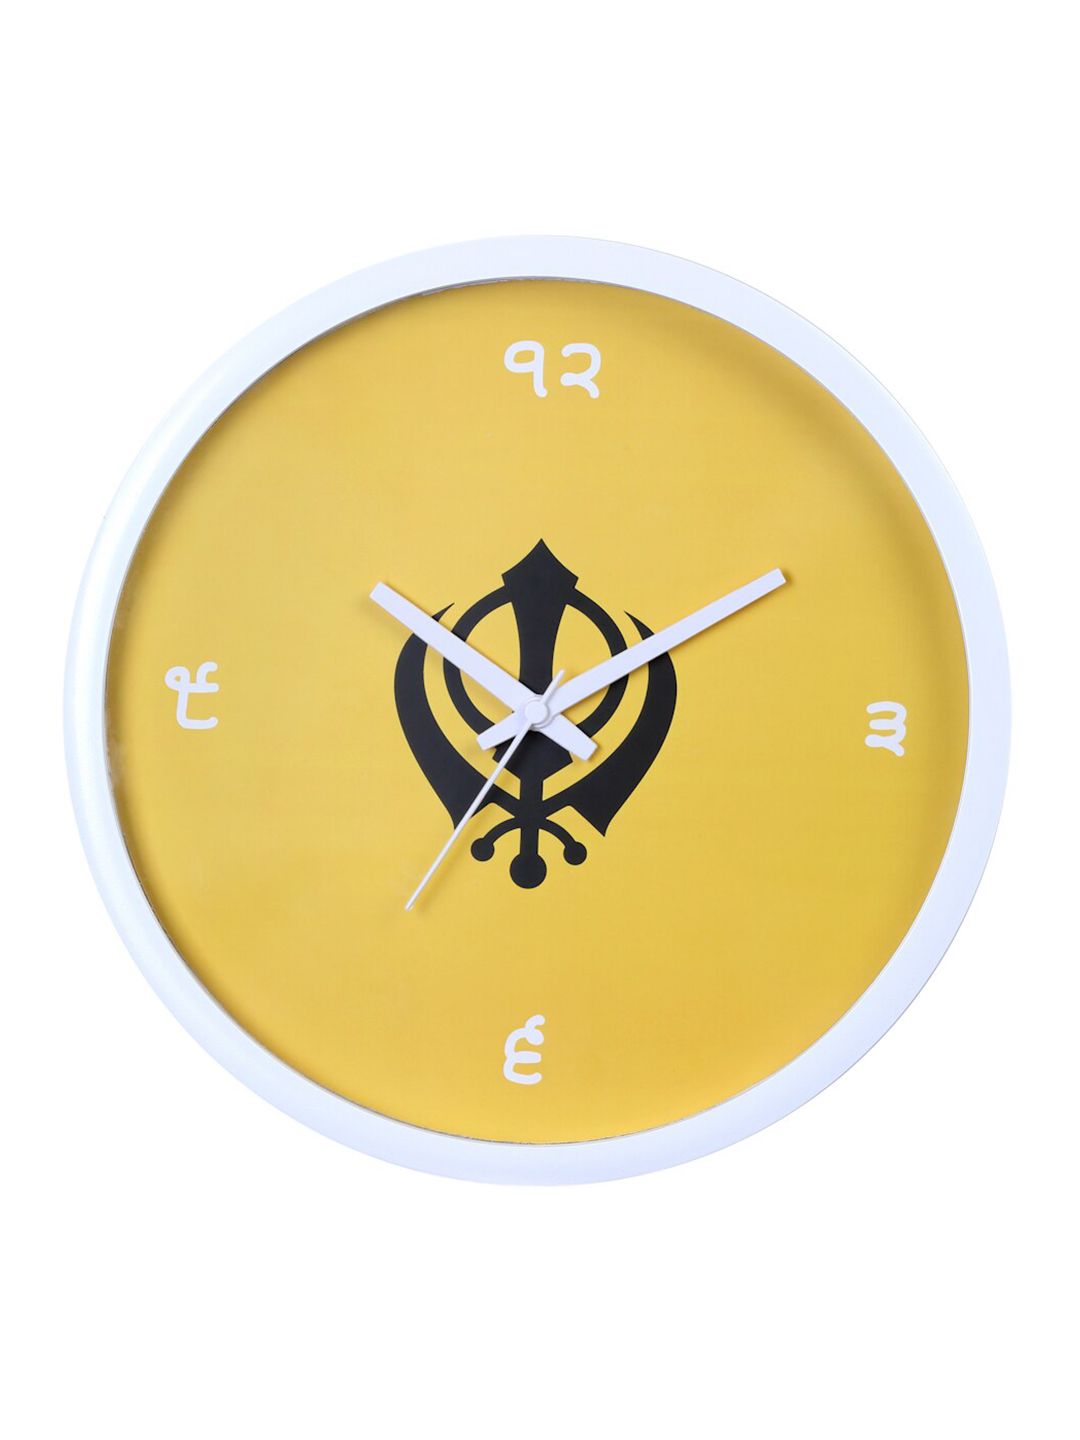 Bodh Design Yellow & White Printed Contemporary 28 Cm Analogue Wall Clock Price in India